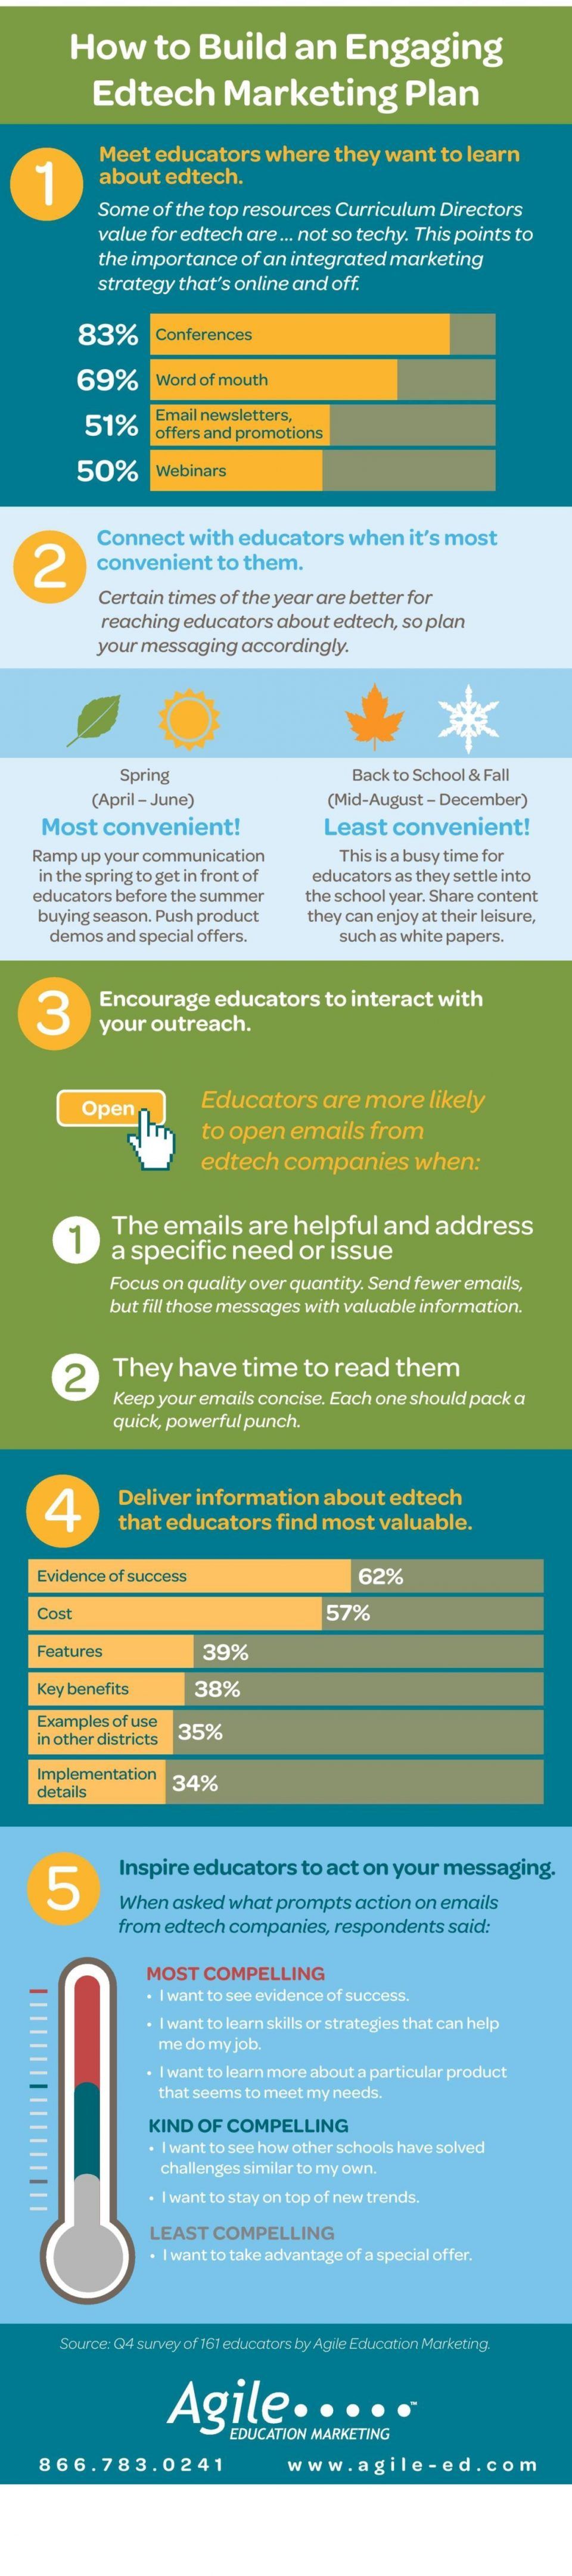 How to Build an Engaging Edtech Marketing Plan Infographic